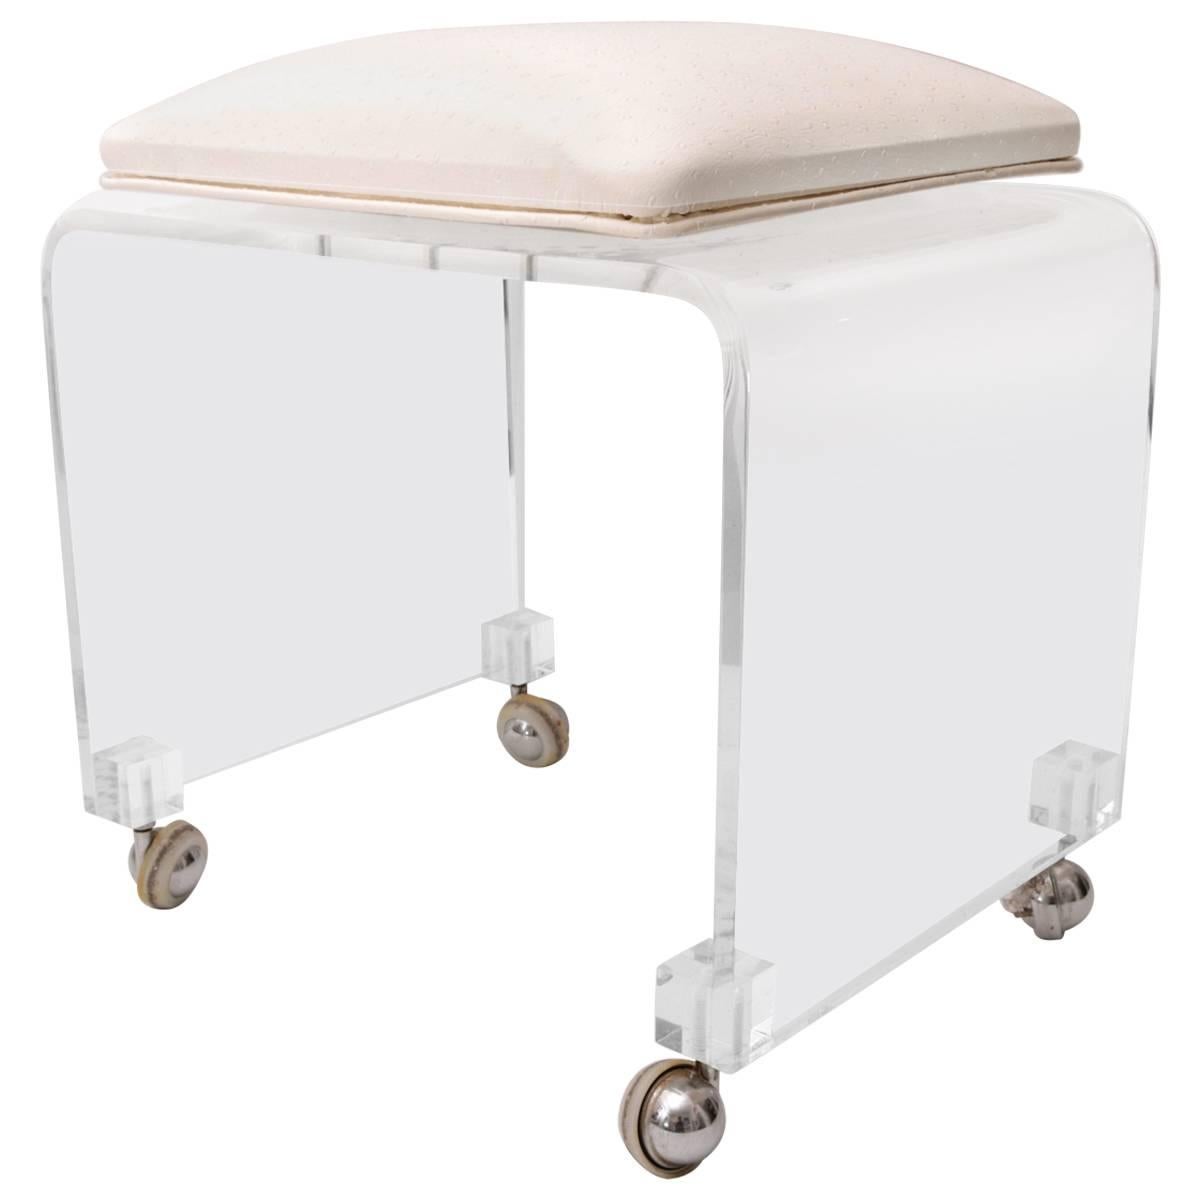 Lucite Vanity Stool, Swivel Seat Upholstered in Ostrich Pattern Fabric